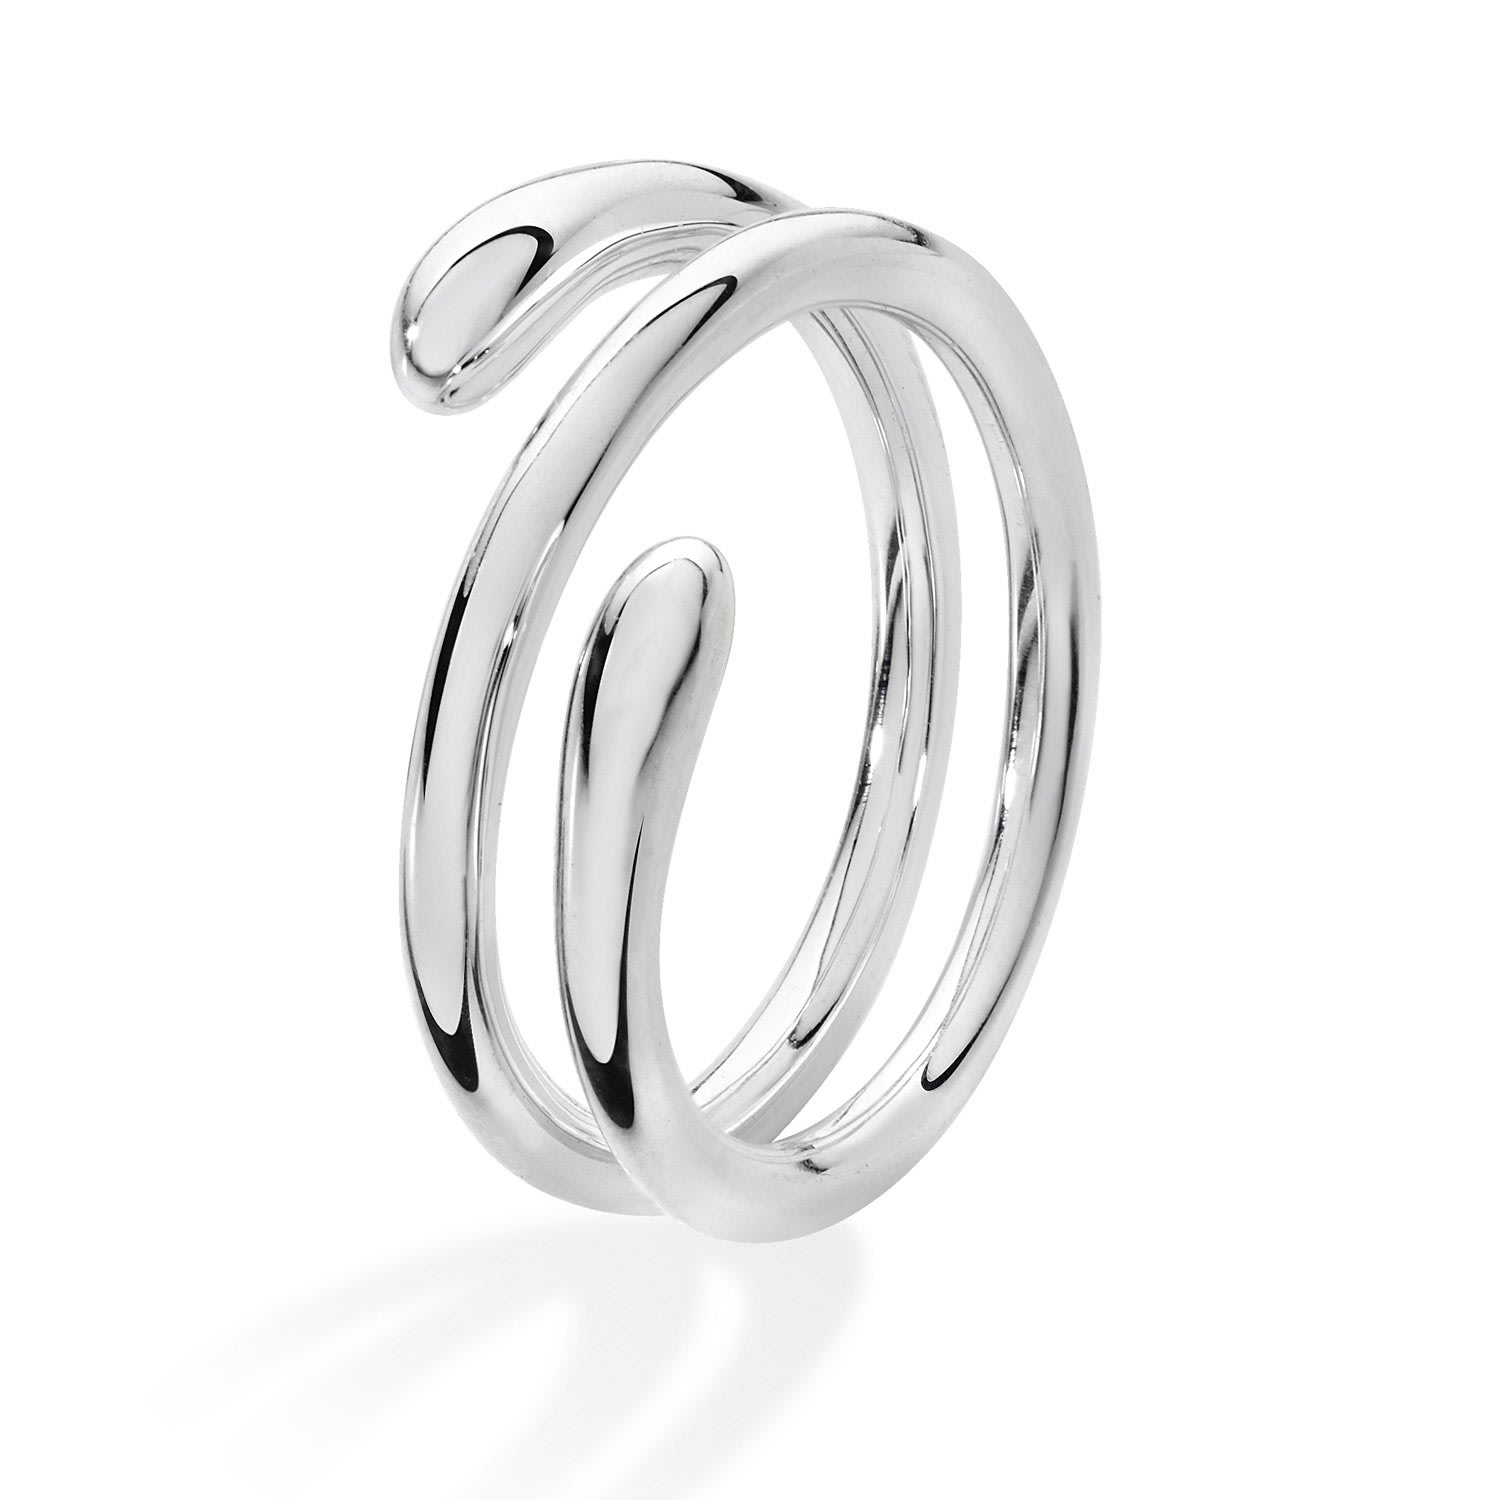 Lucy Quartermaine Women's Sterling Silver Coil Drop Ring, Award Winning Designer Jewellery By , Every In Metallic